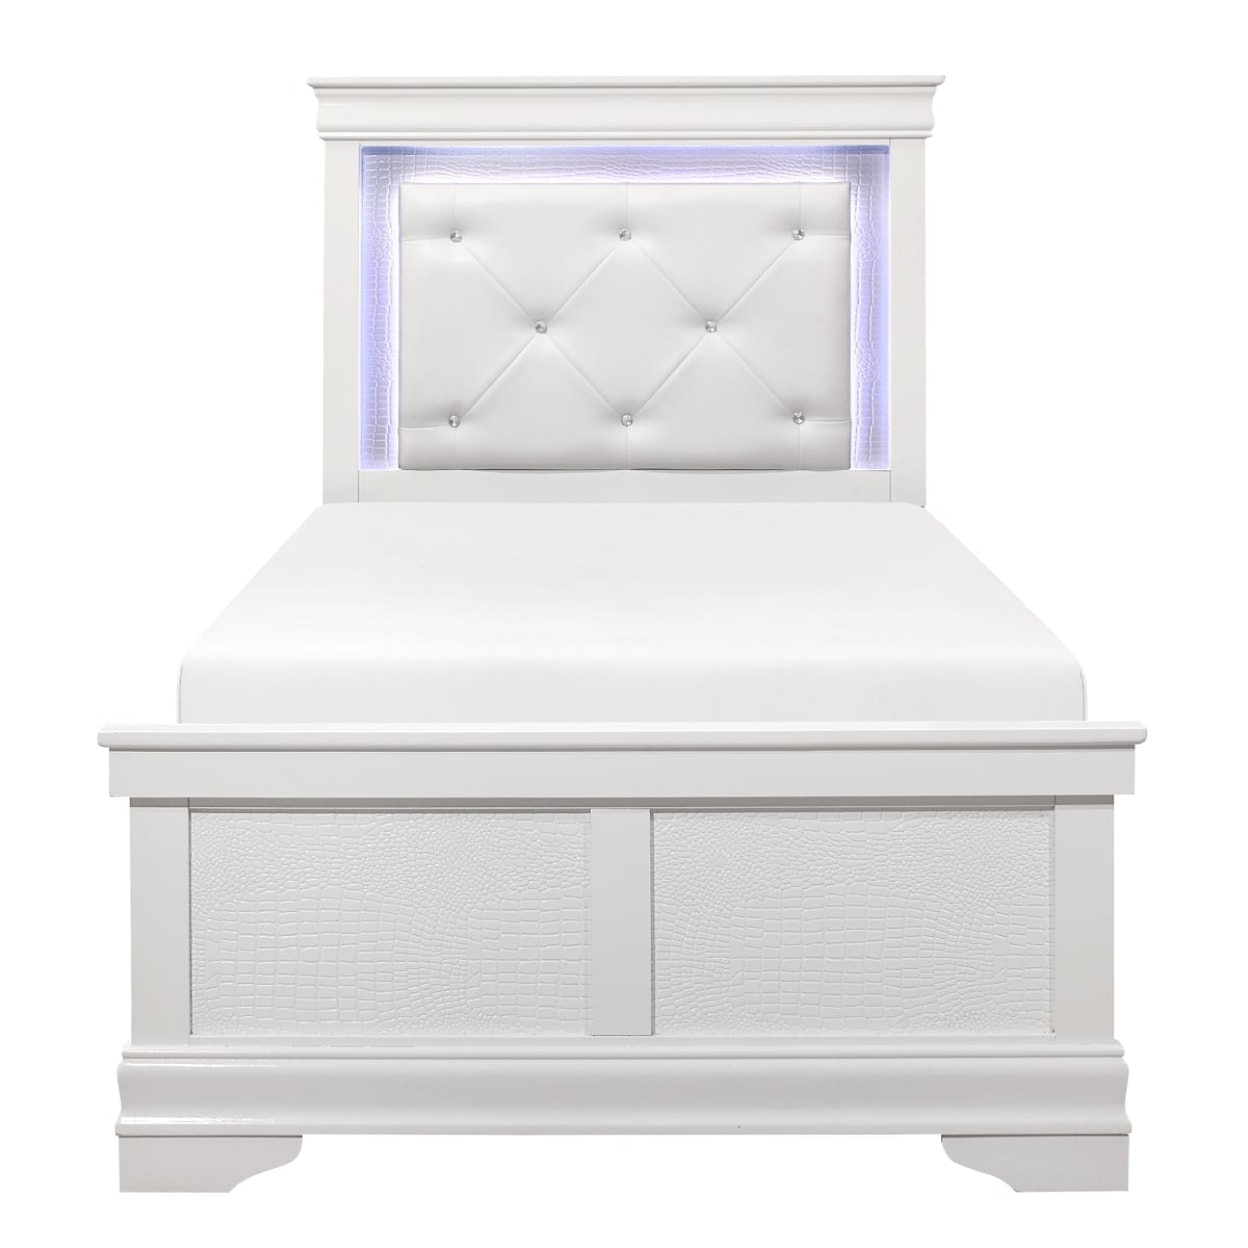 Homelegance Furniture Lana Twin Bed with LED Lighting